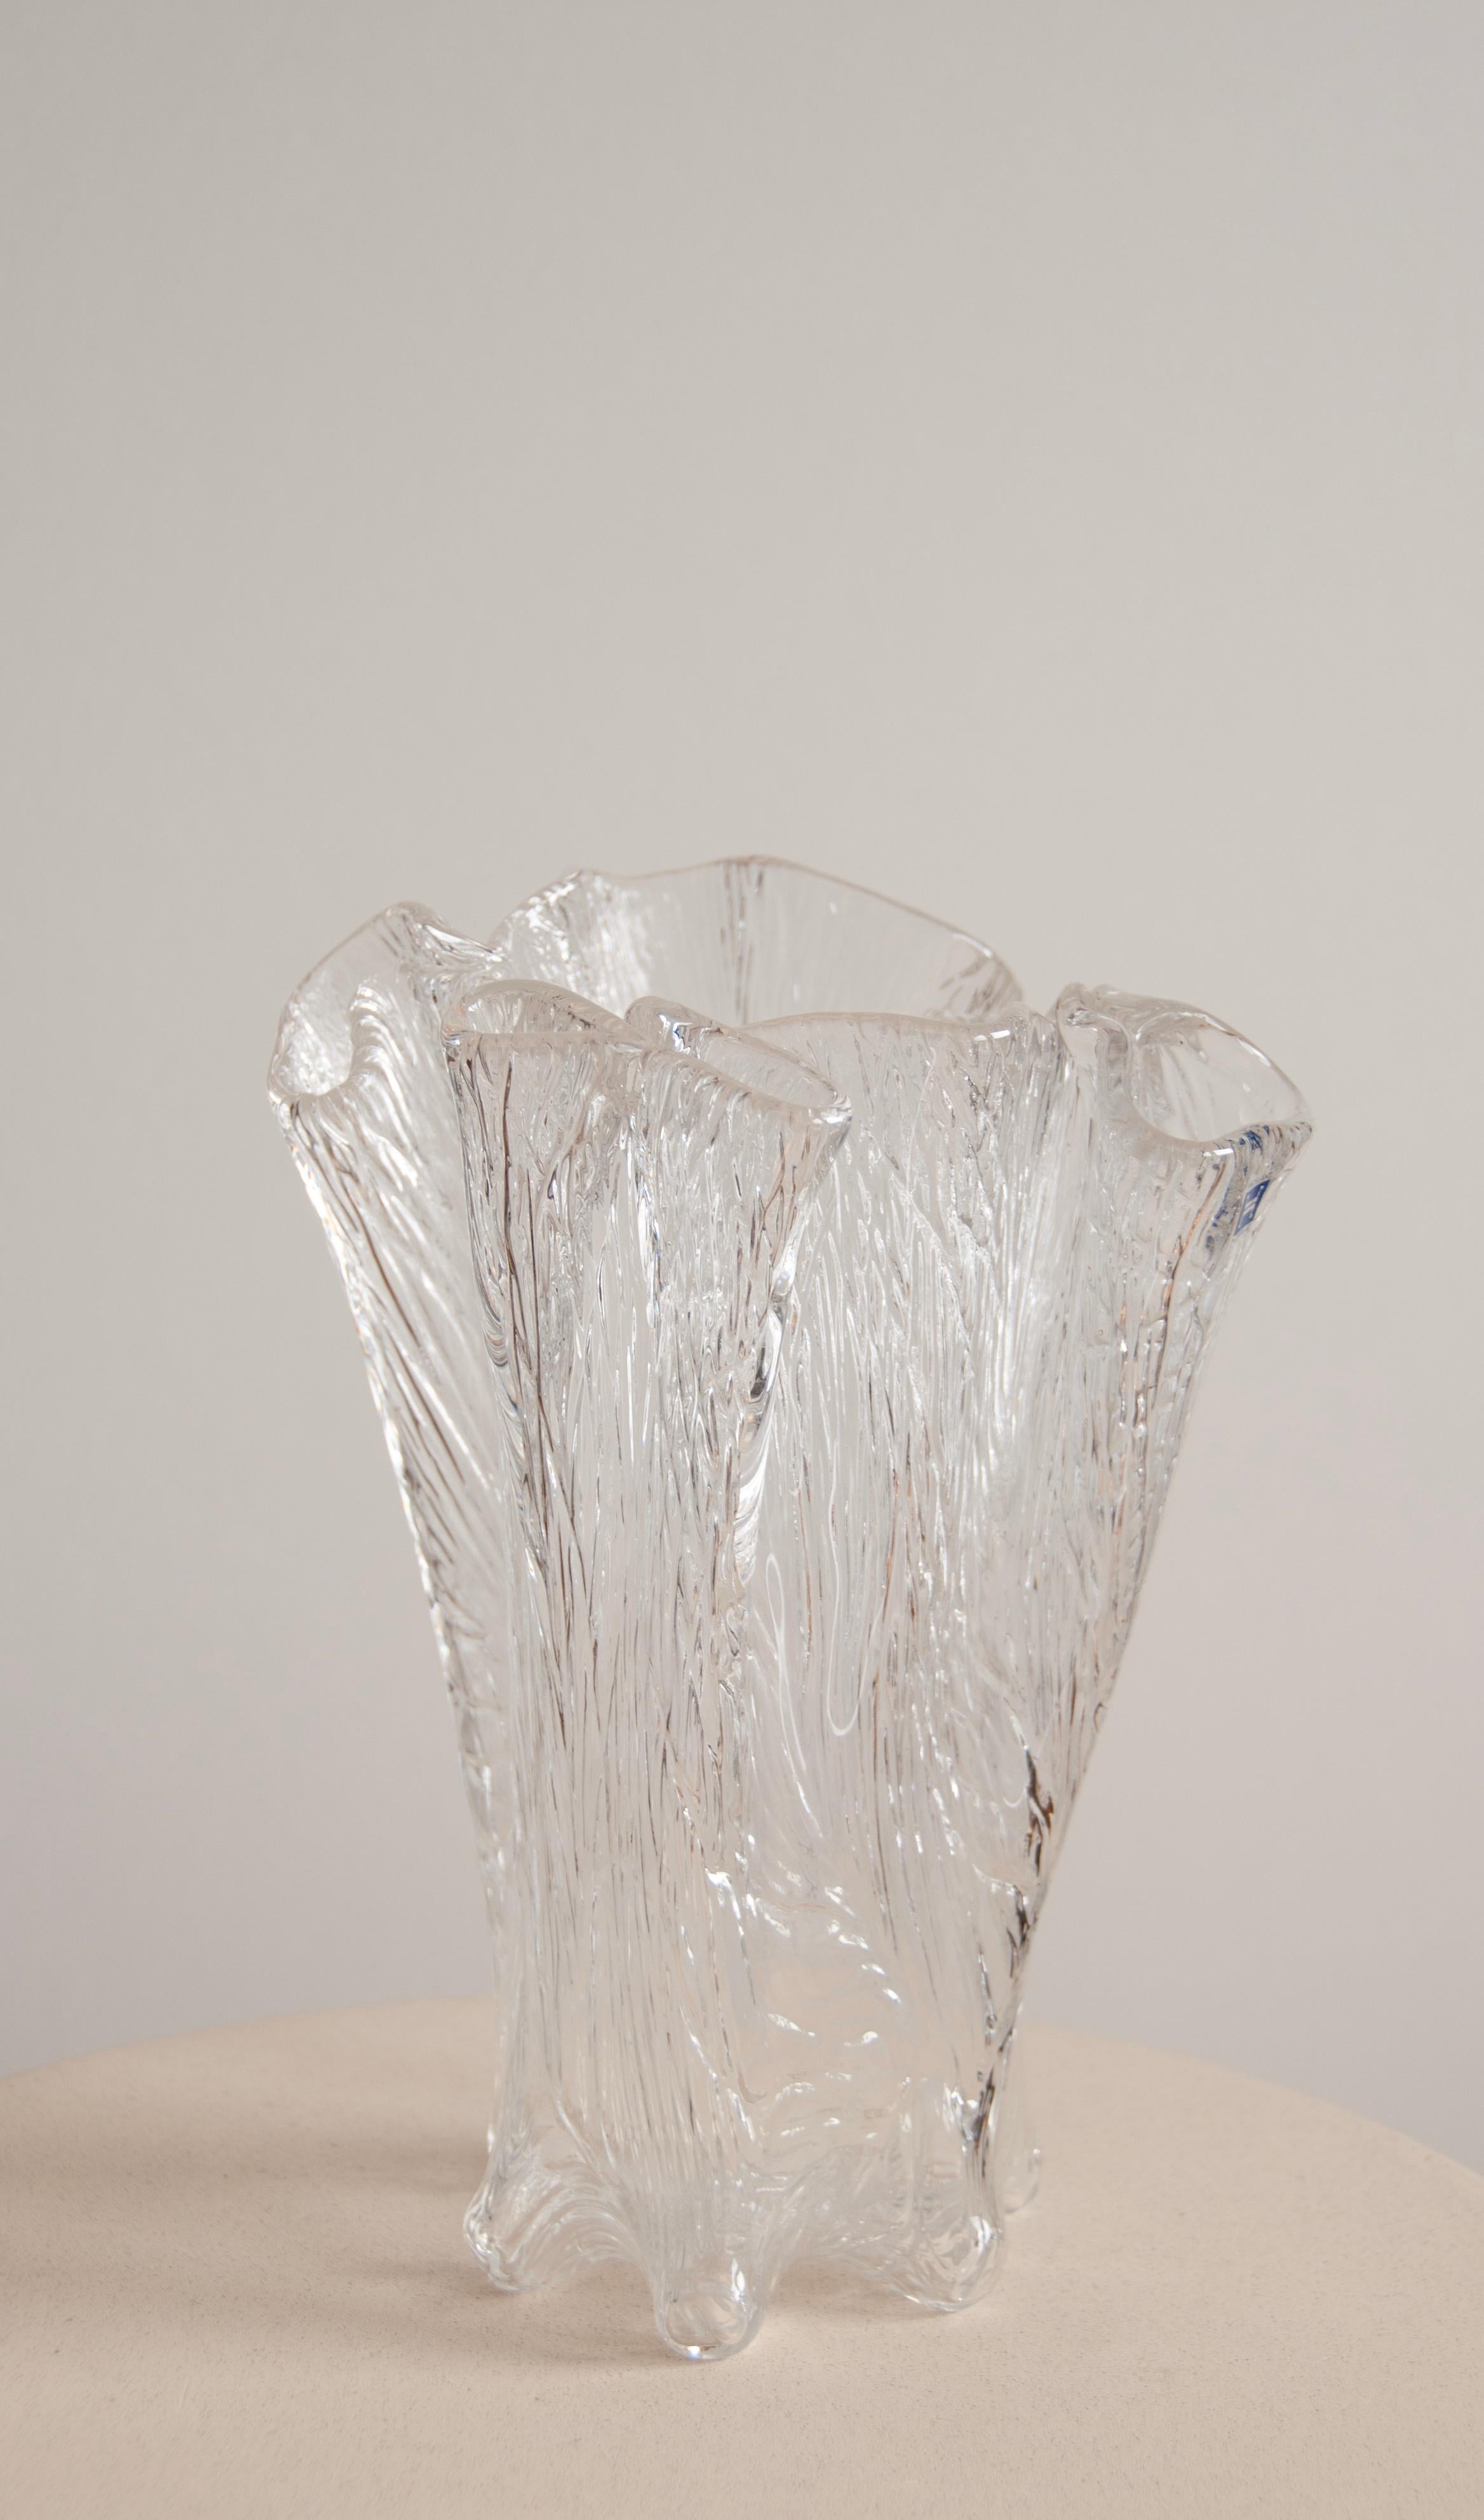 Severin Brørby's Iconic Furu Vase from Hadeland Glassworks

The Furu Vase:
This Furu vase is a timeless piece that highlights Severin Brørby's distinctive style. With its relief motif and robust execution, this vase is an impressive addition to any